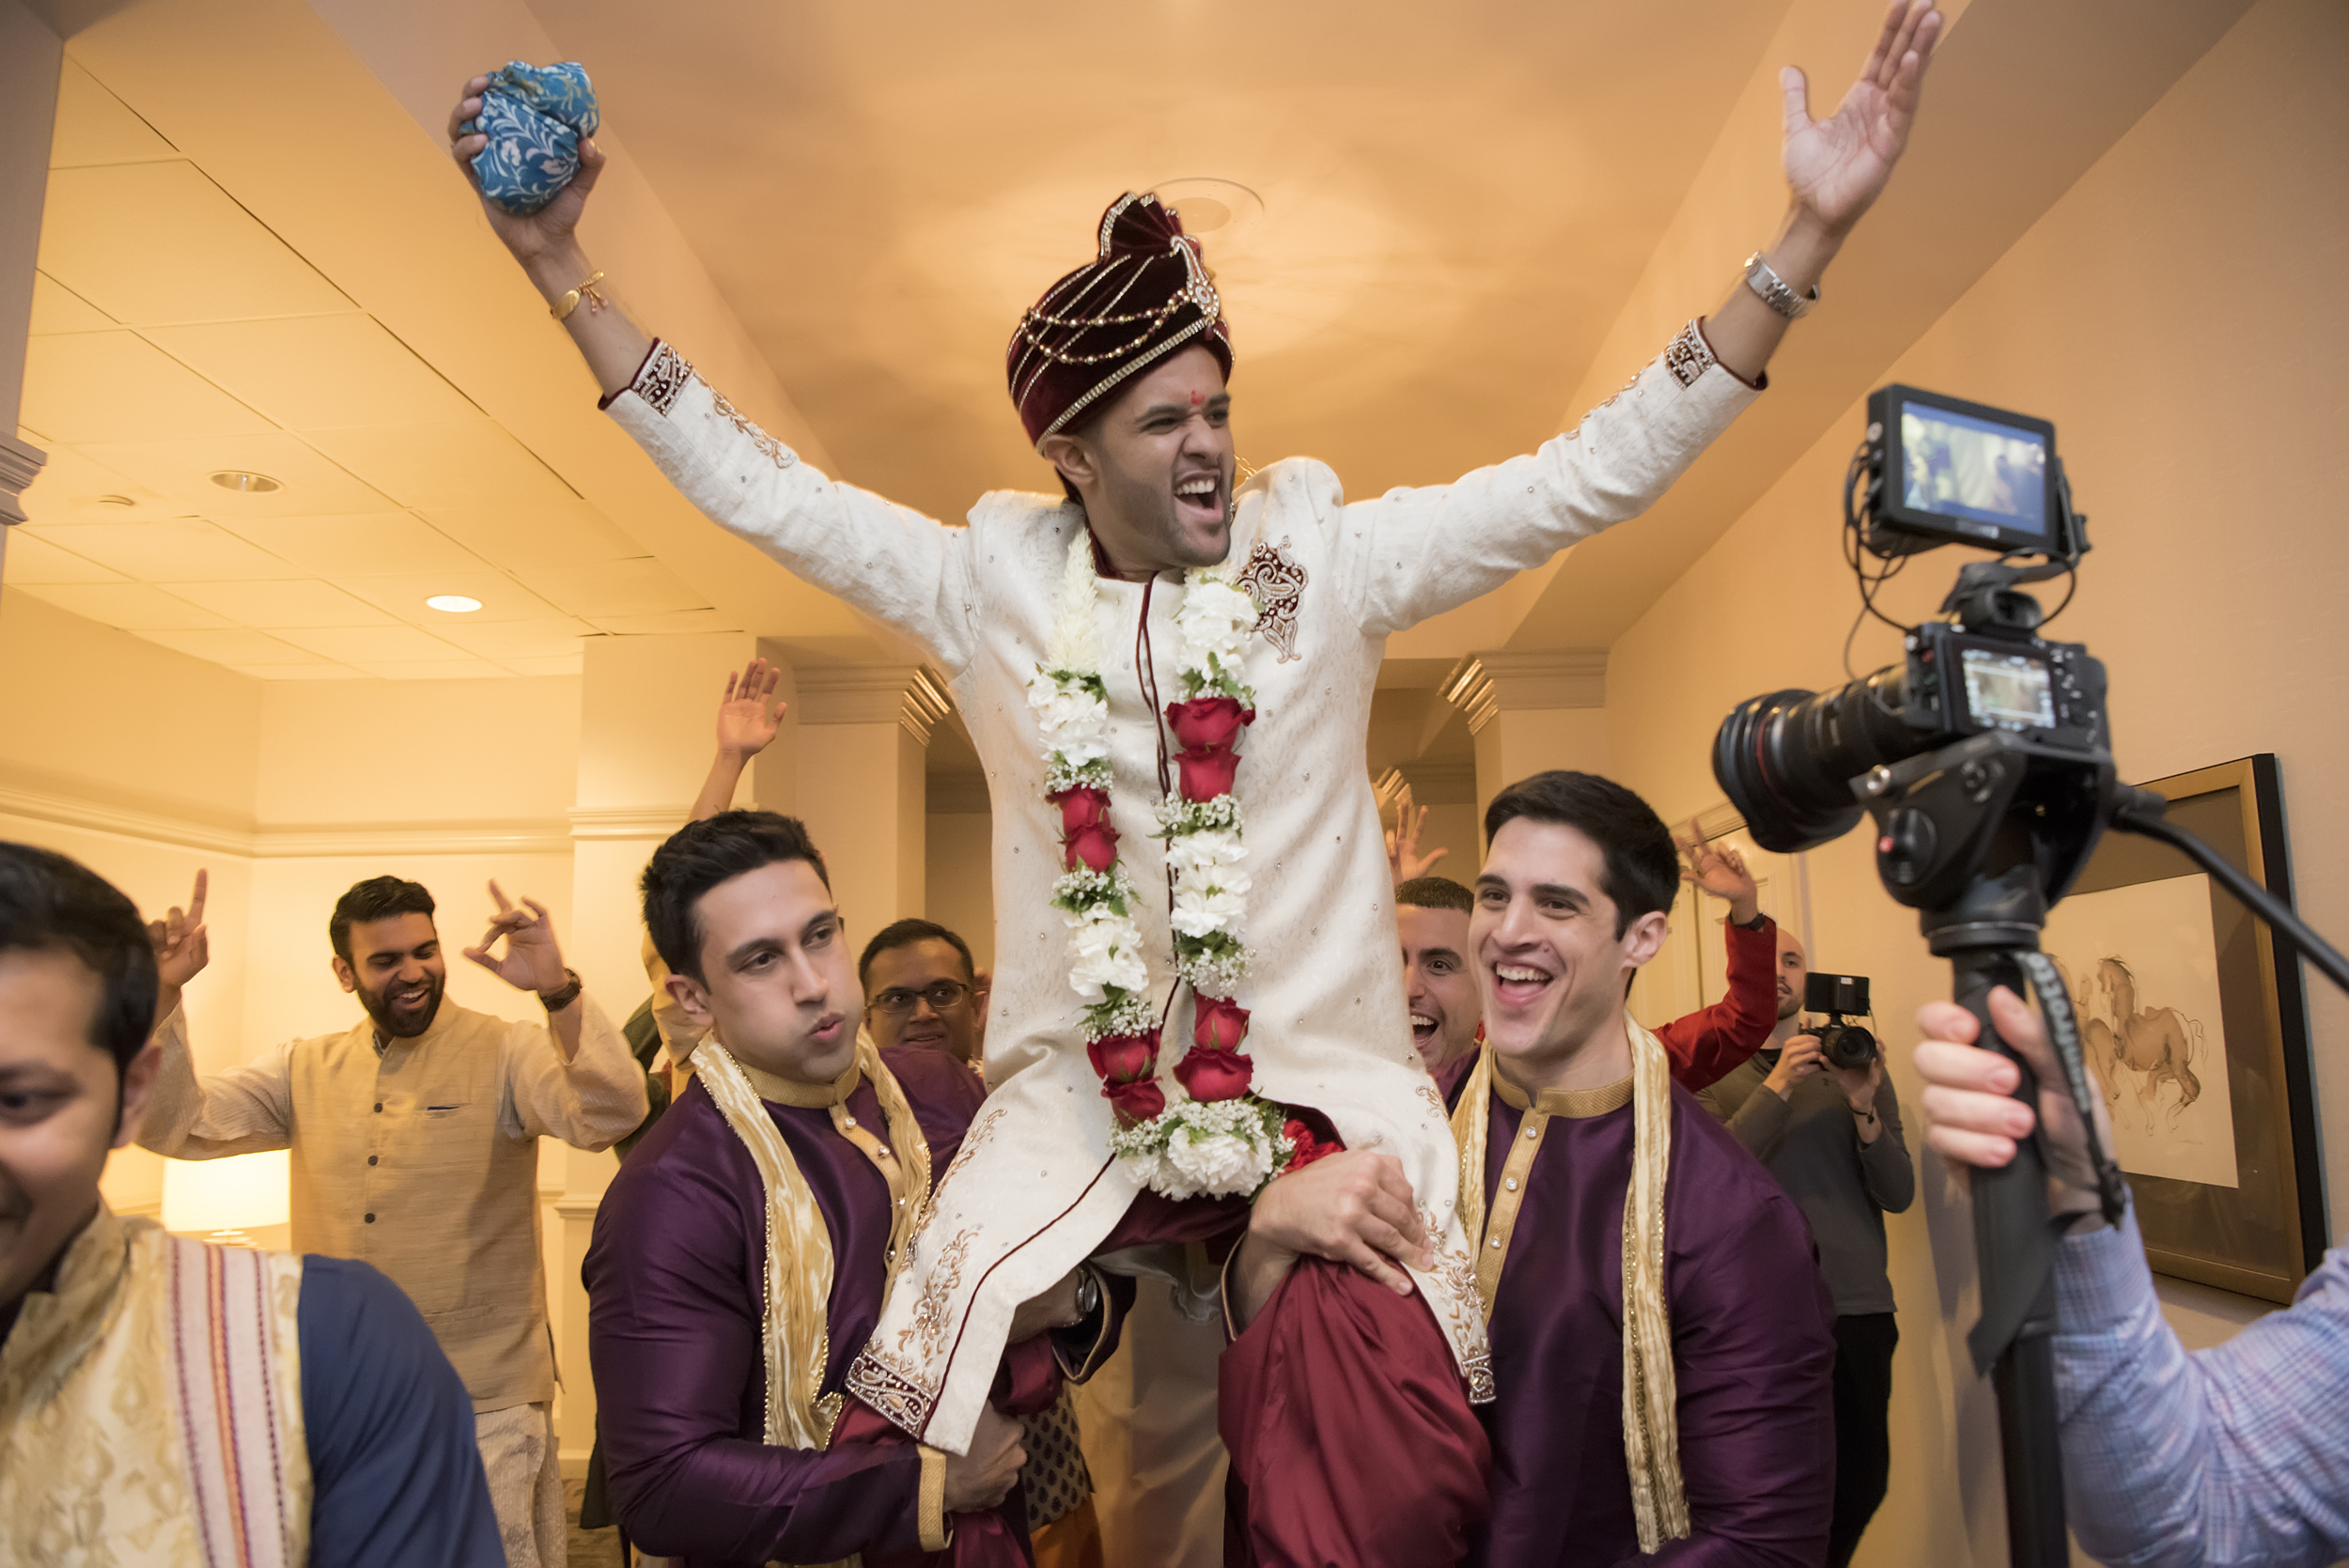 A groom in traditional Indian wedding clothes cheers as he is lifted on the shoulders of two groomsmen, while a videographer records the events in a photo by Studio A Images